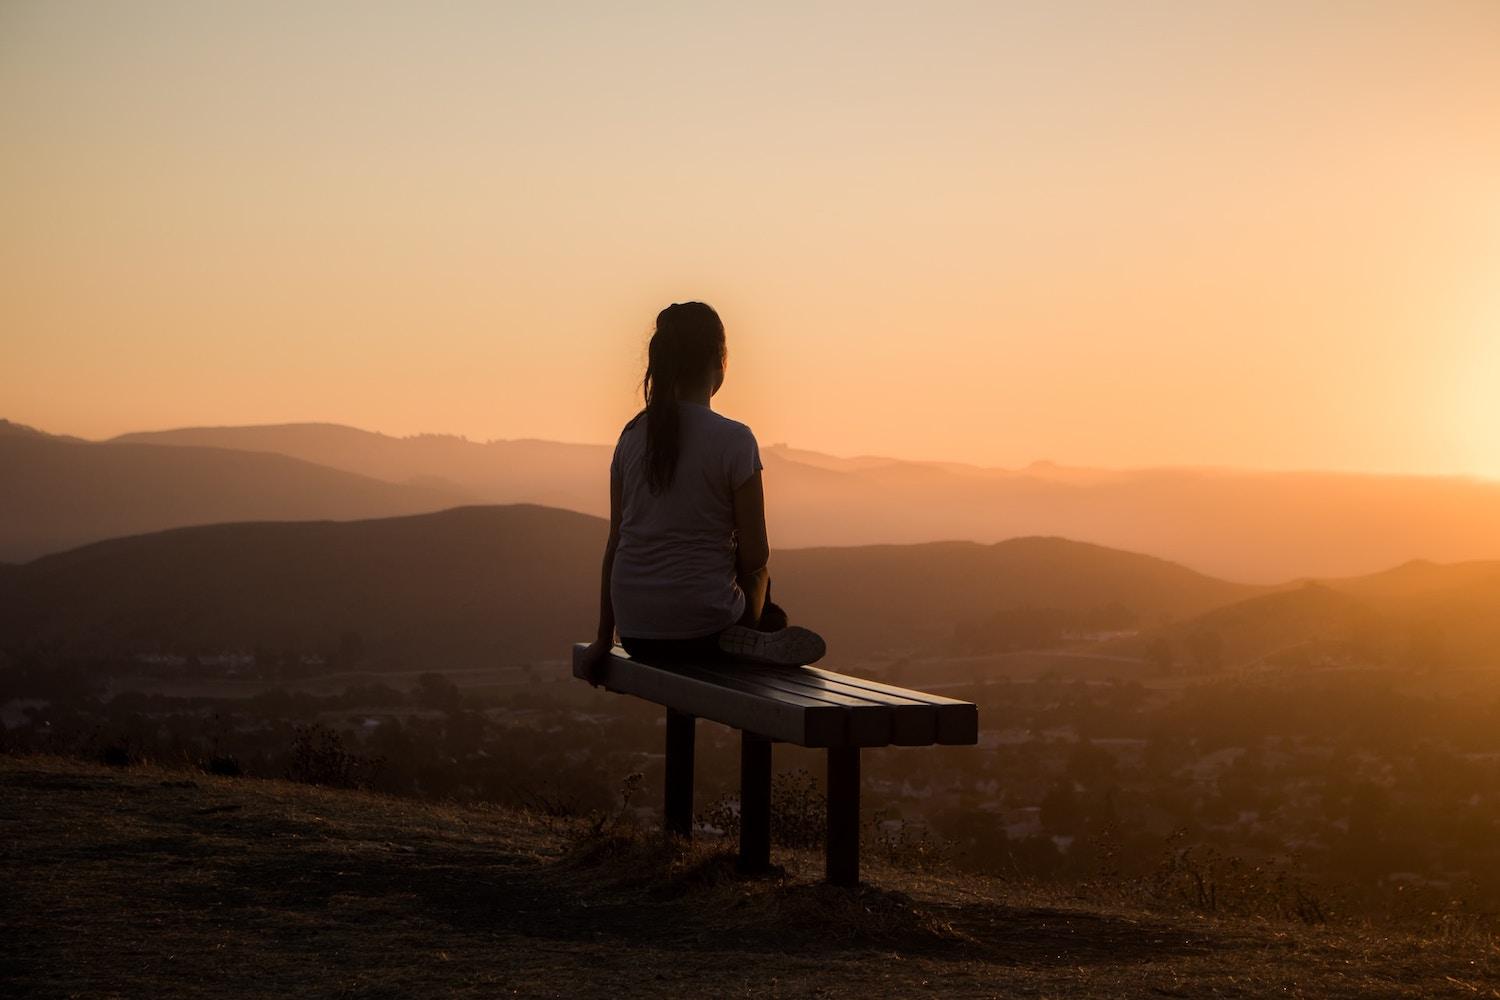 woman sitting meditating on park bench with mountain view at sunset